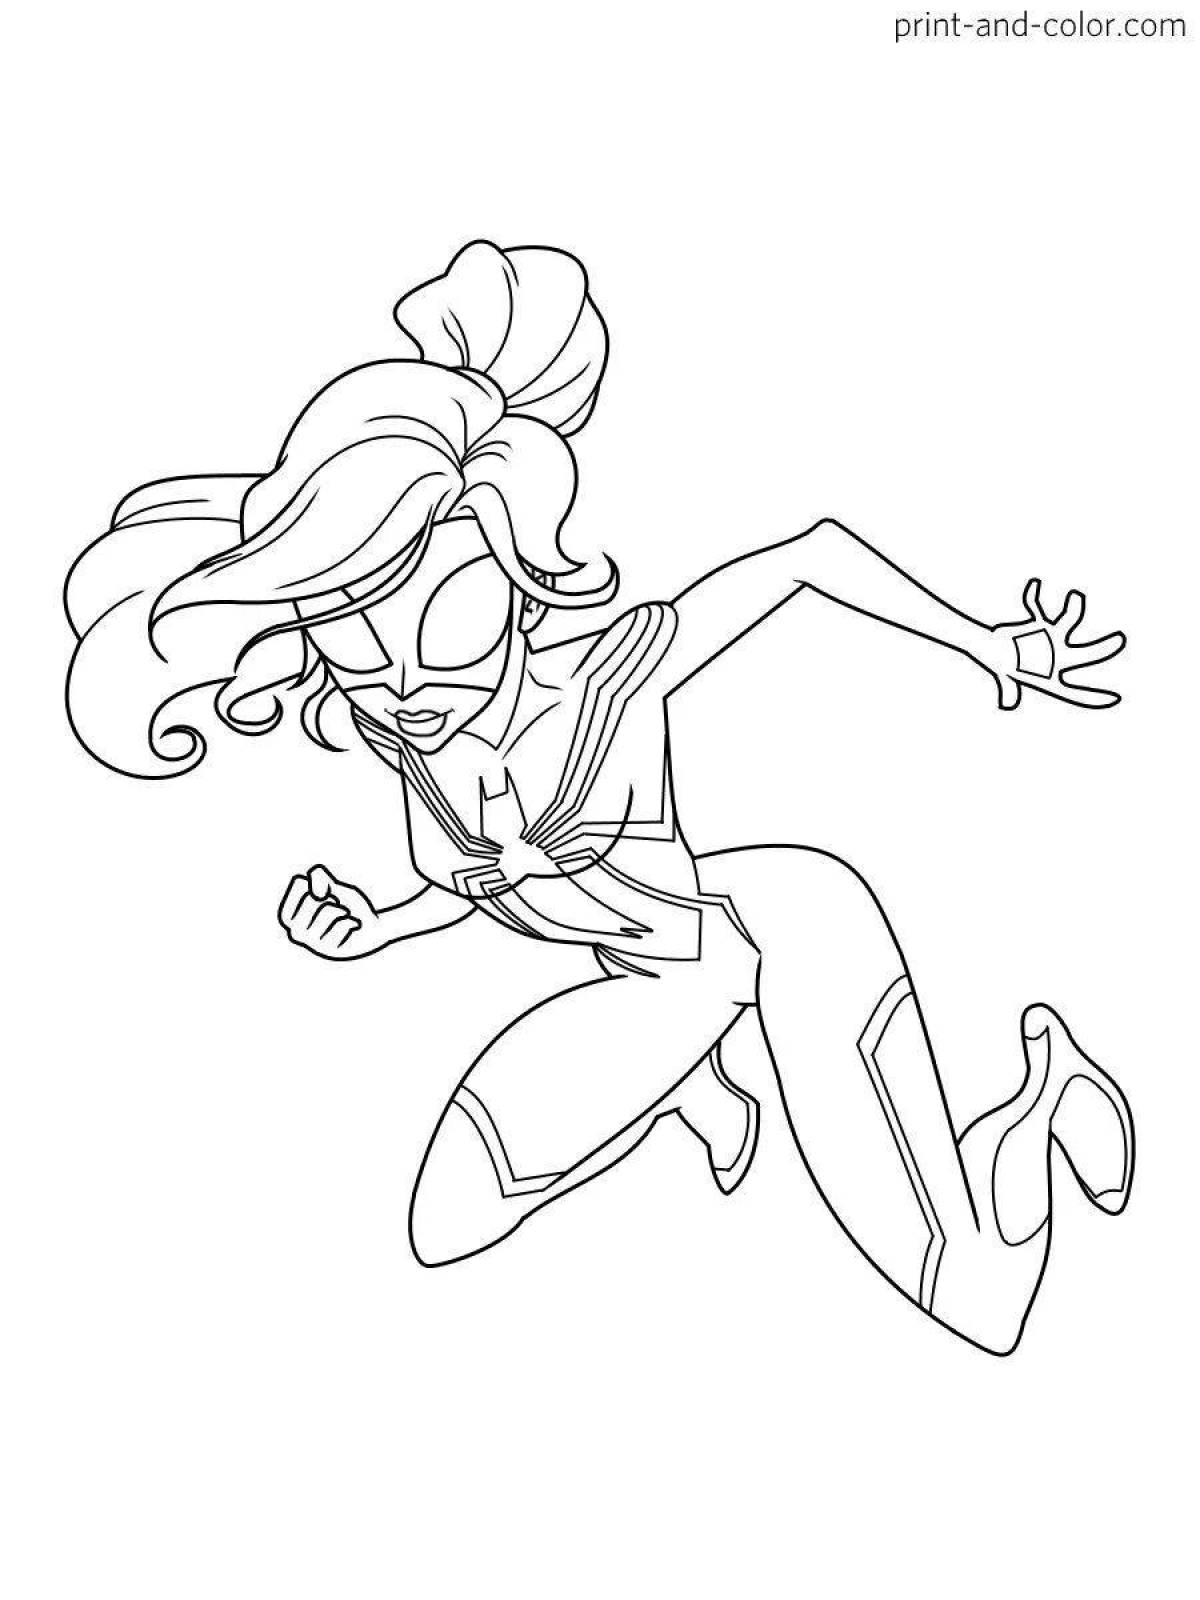 Cute gwen spider coloring page